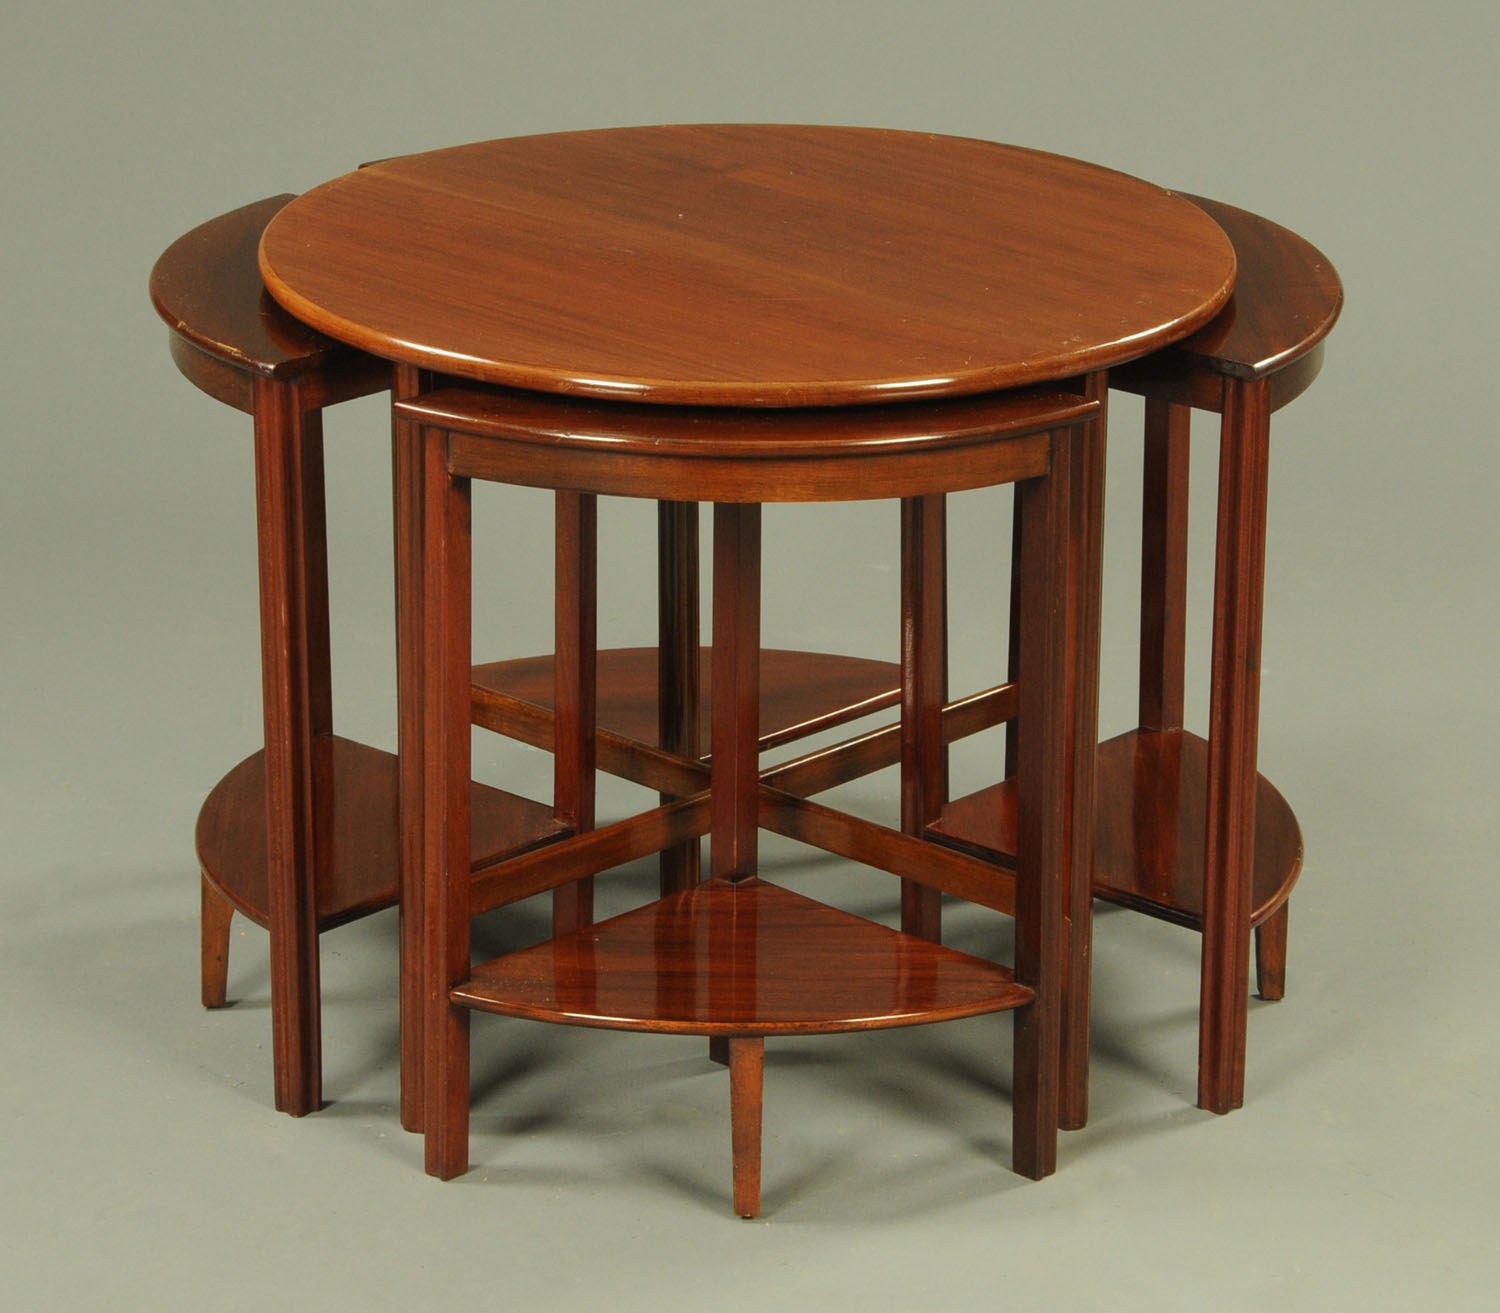 An Edwardian mahogany circular nest of tables, with one large table and four quadrant tables. - Image 2 of 2